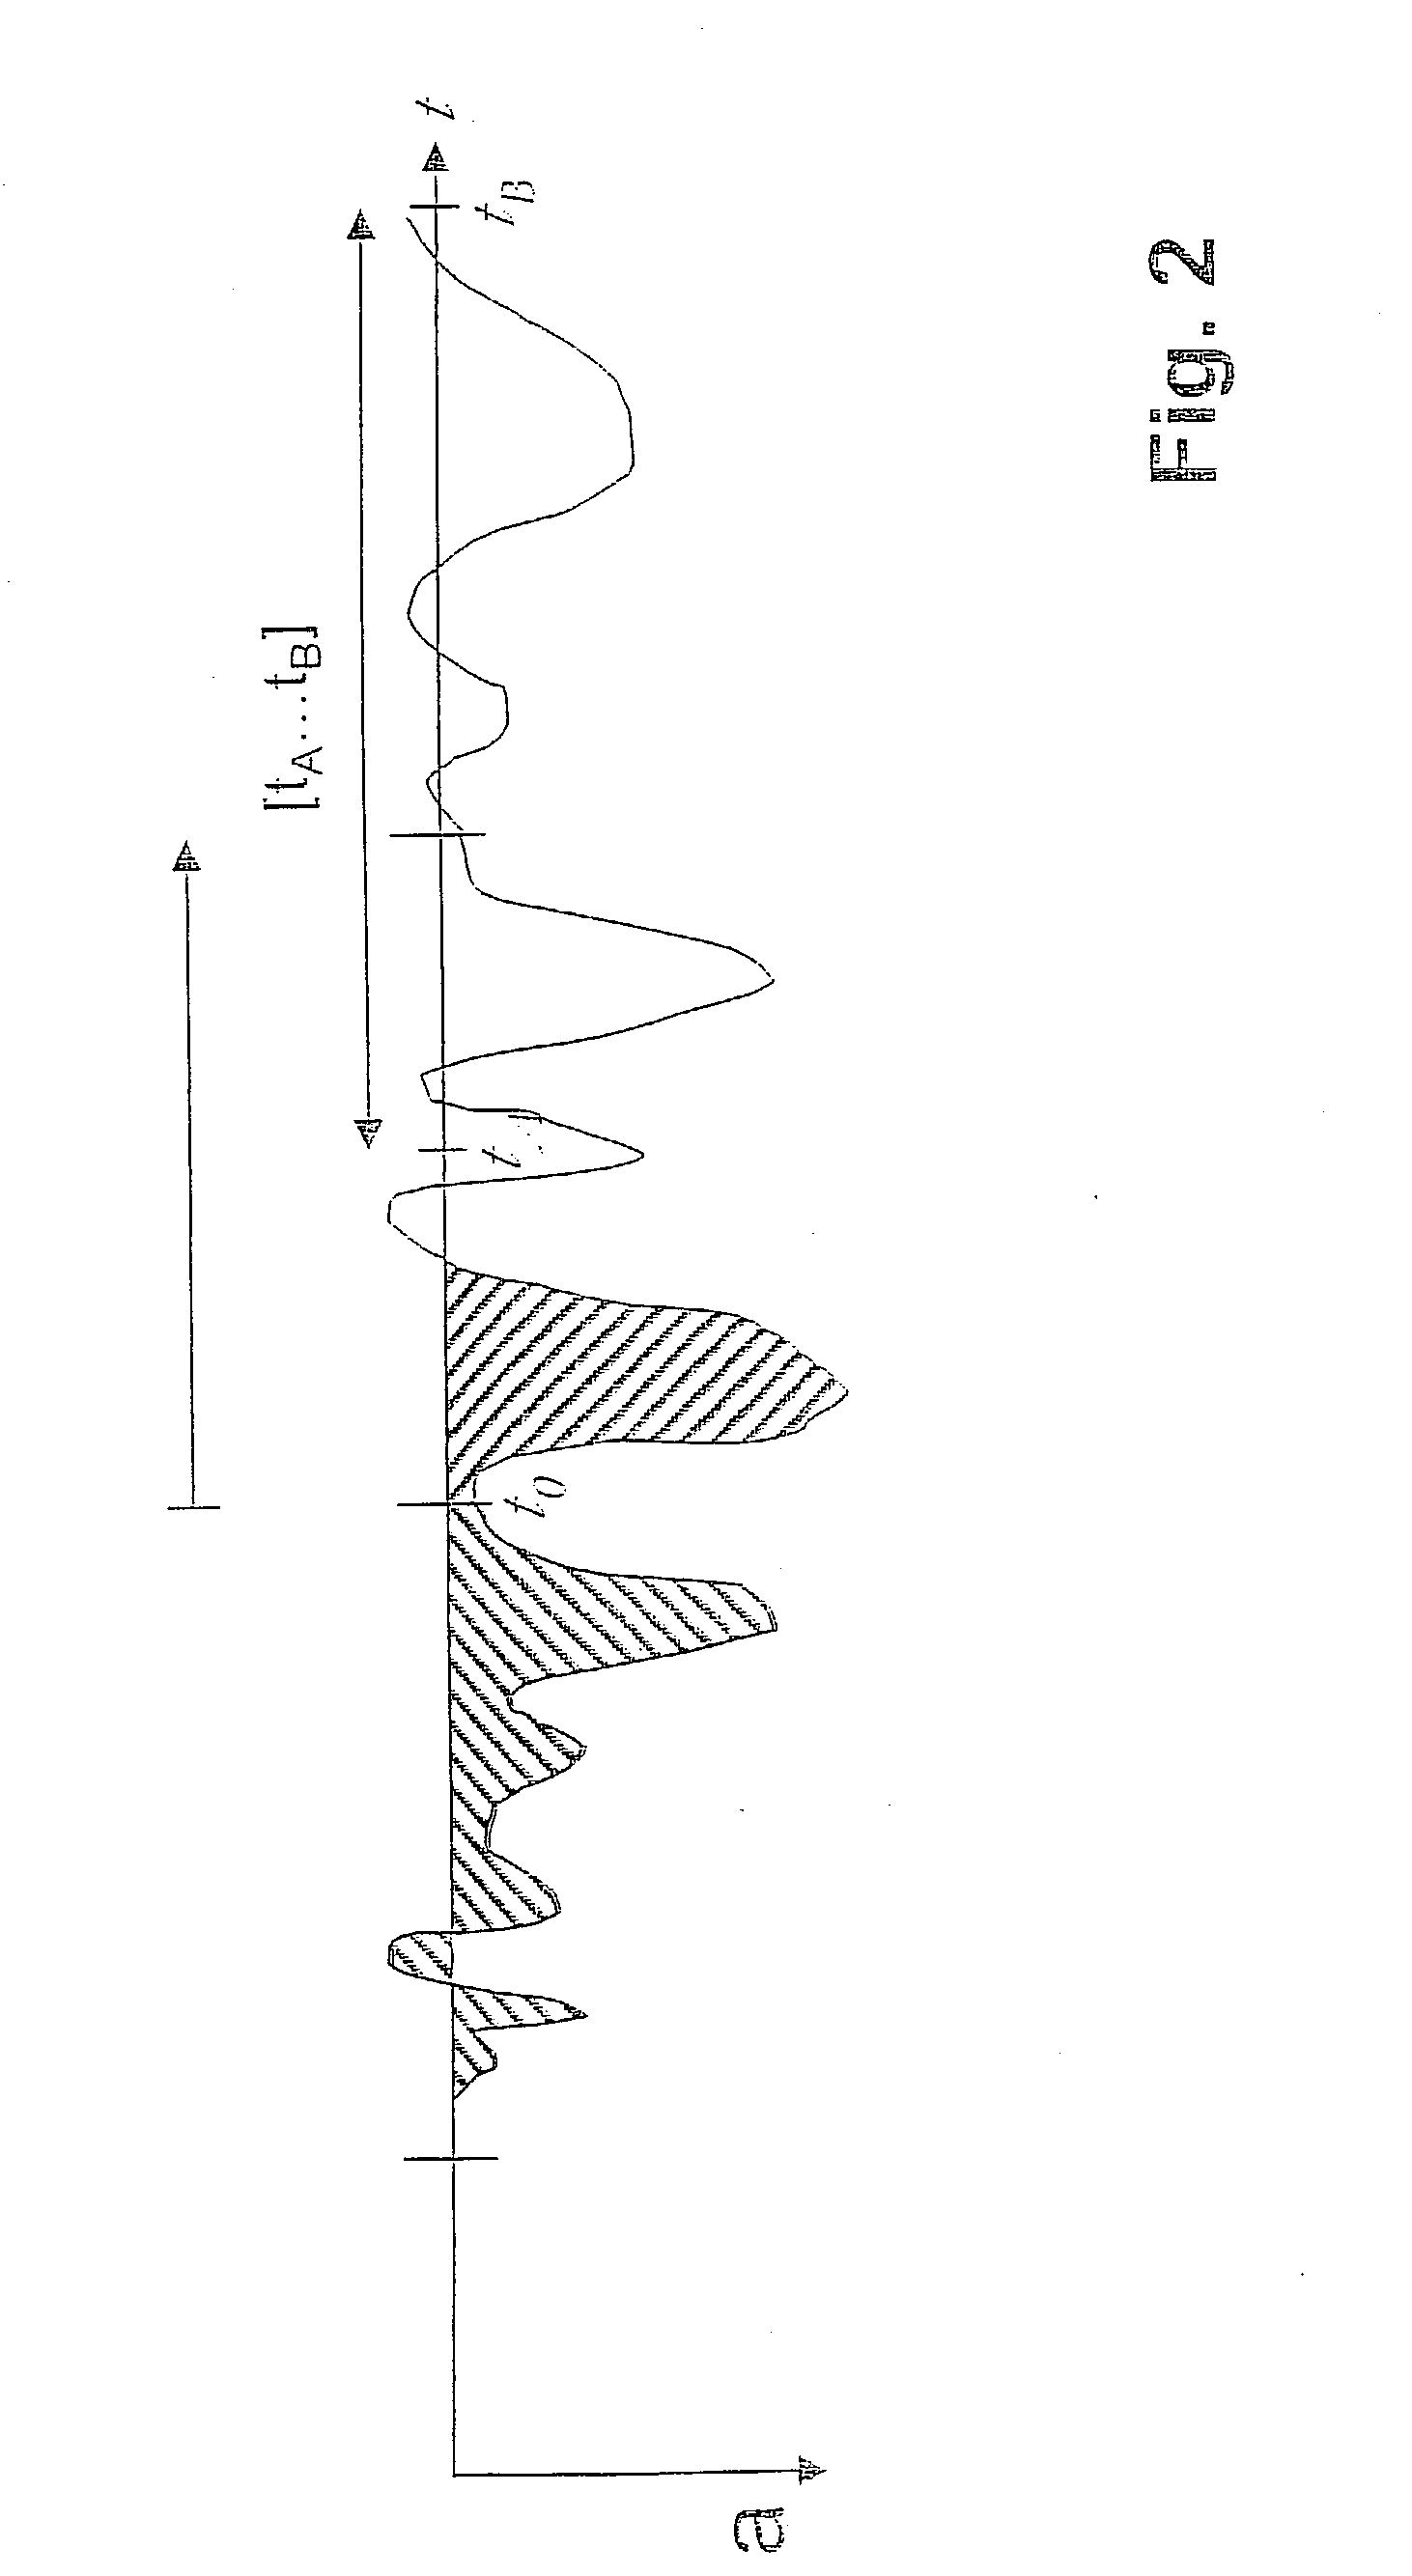 Method for triggering means of restraint in a motor vehicle